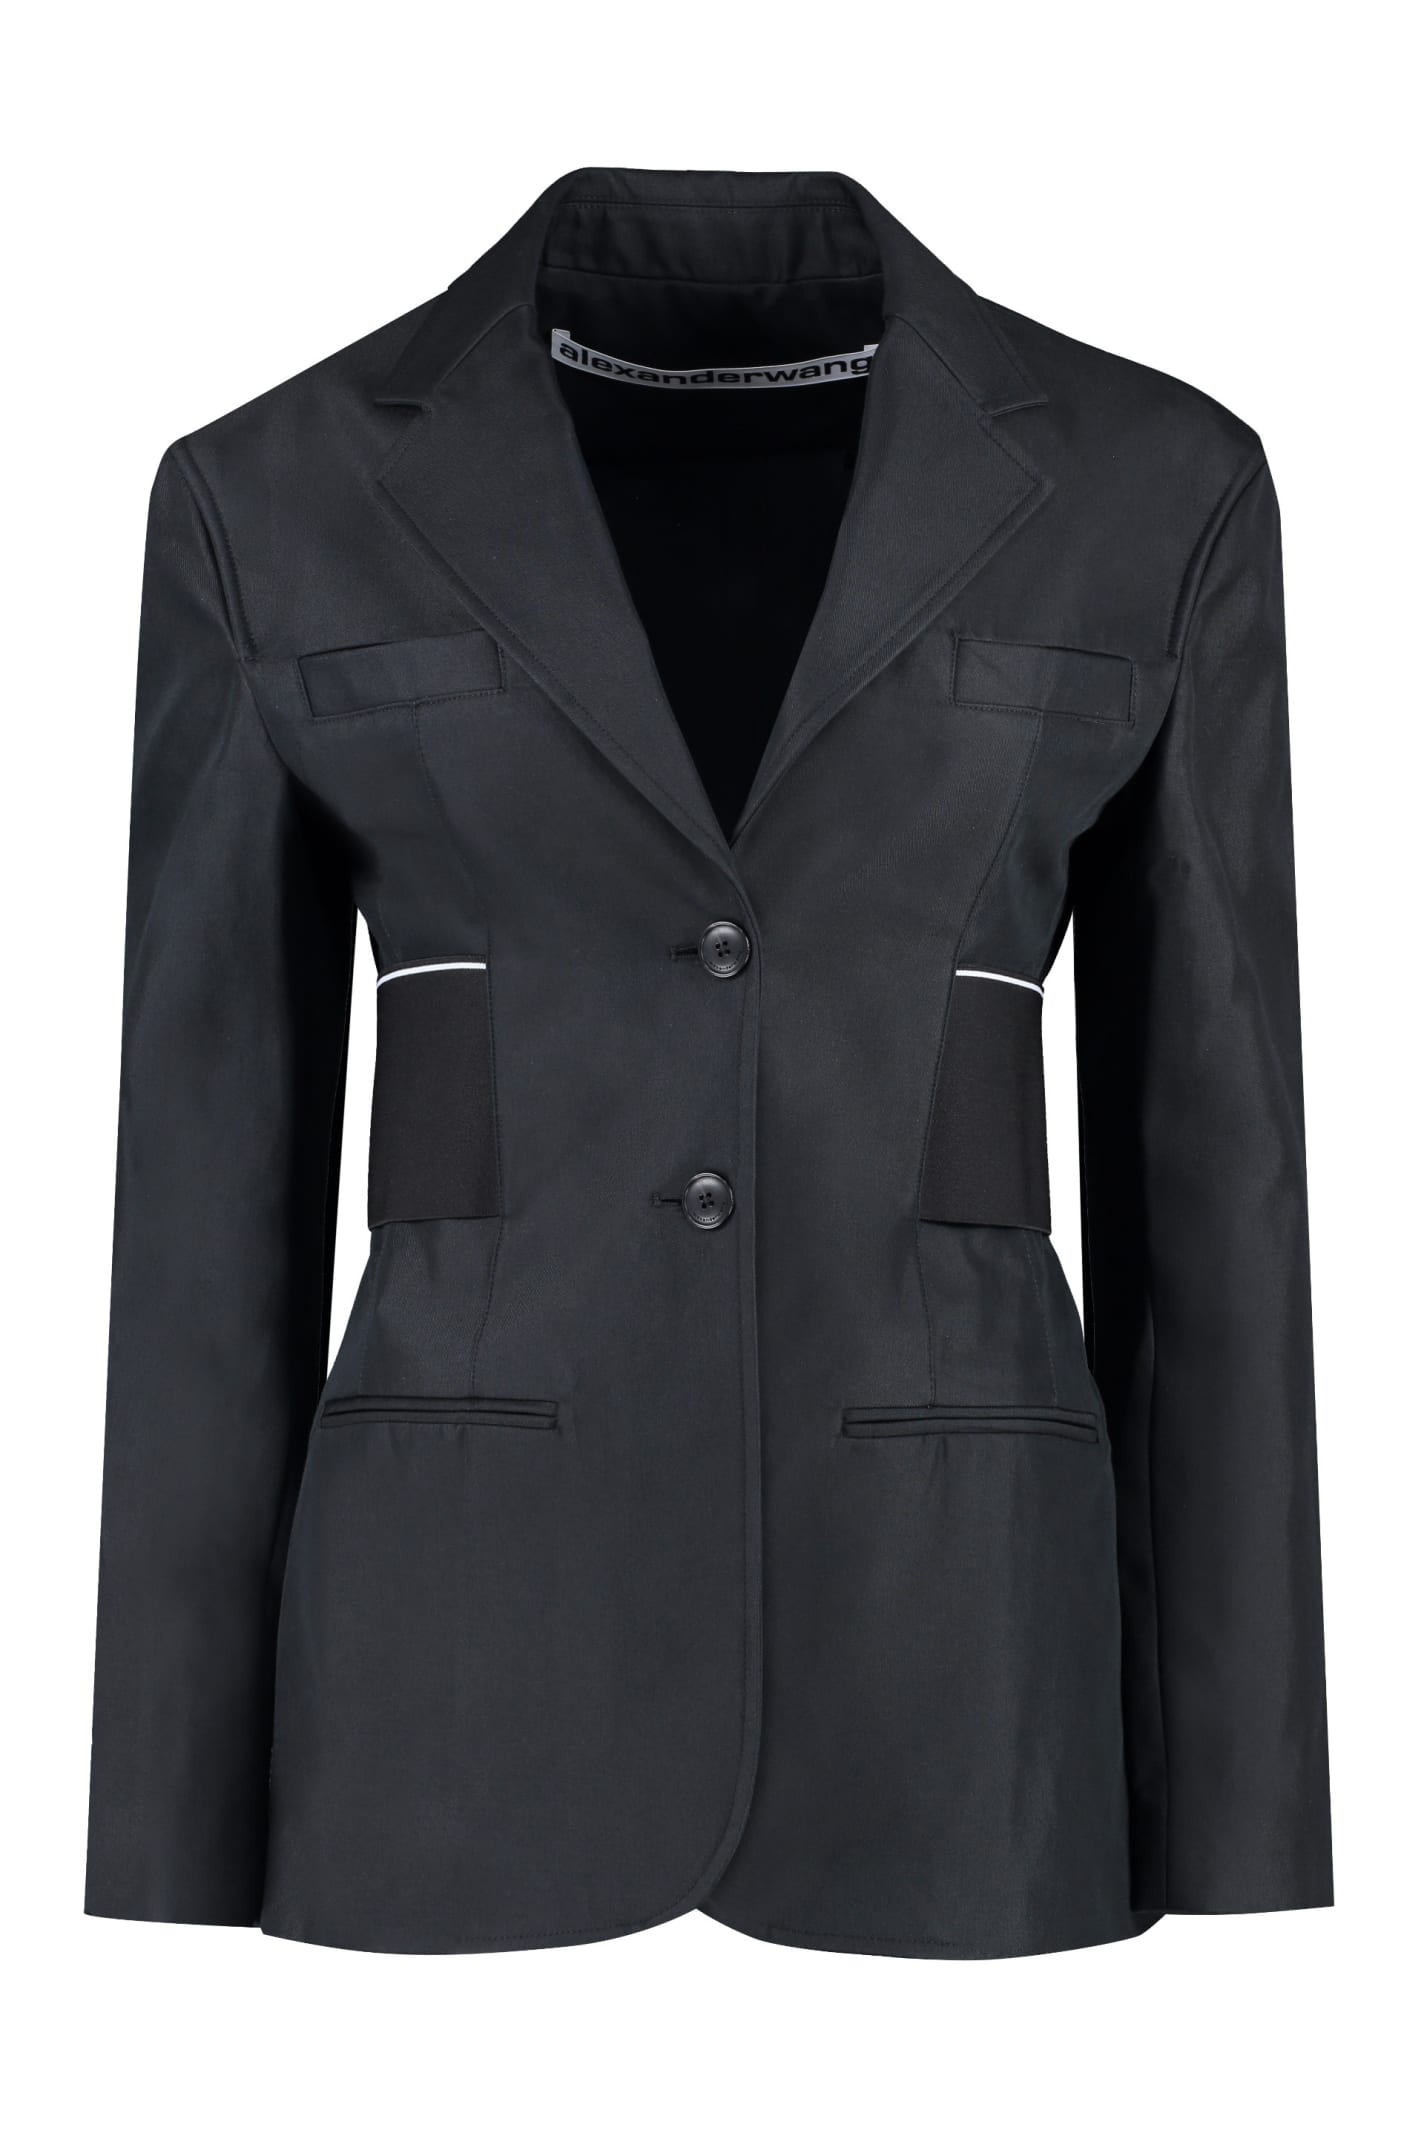 Alexander Wang Single-breasted Two-button Blazer